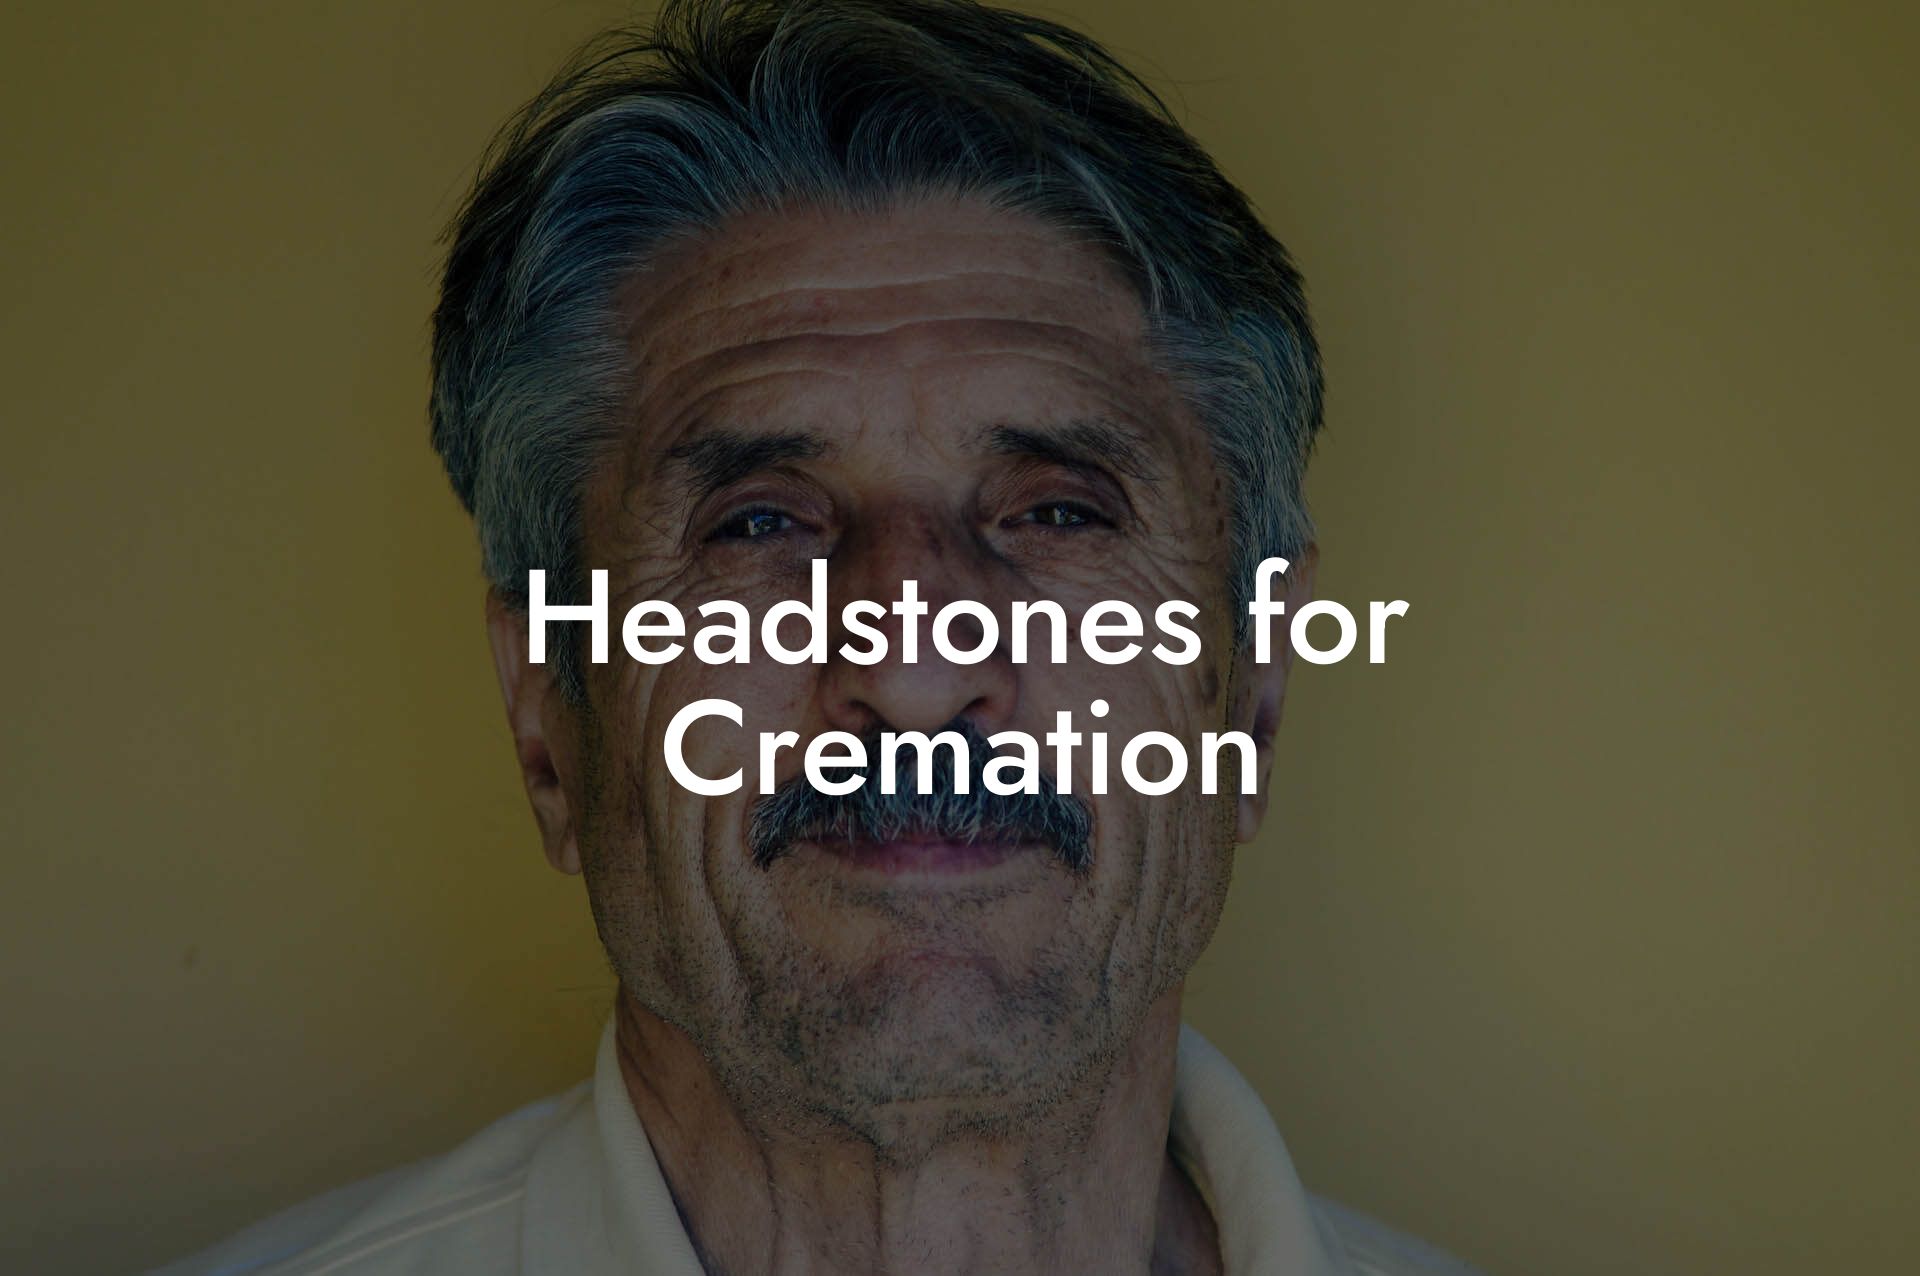 Headstones for Cremation